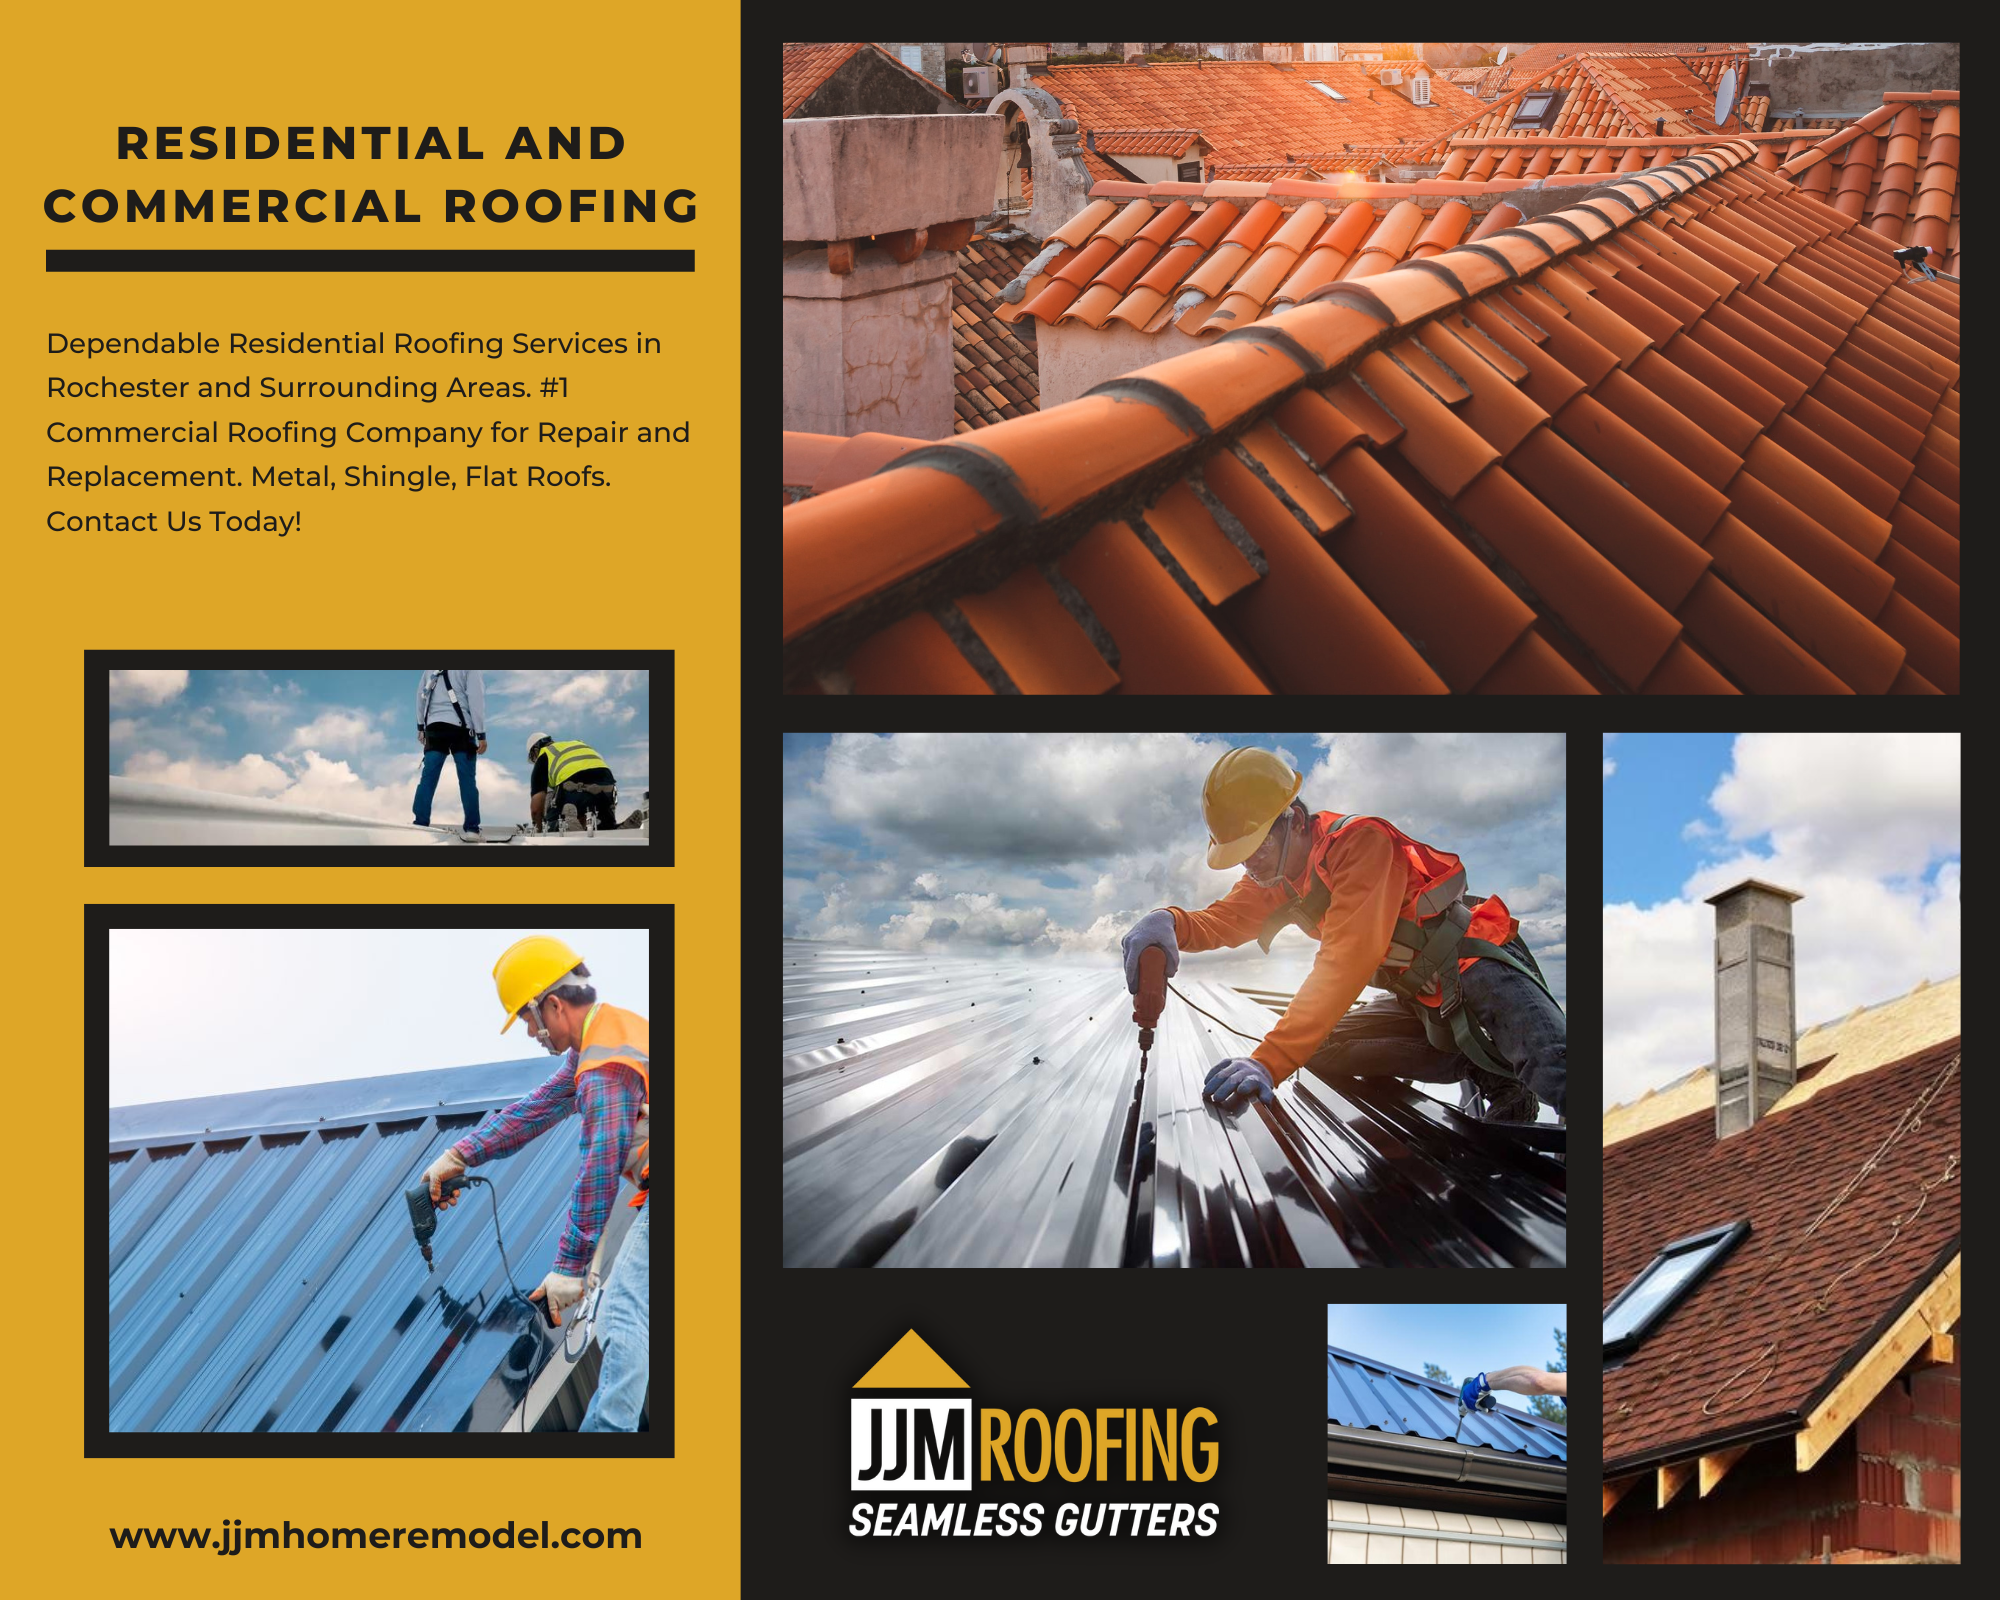 Seamless Commercial Roofing, LLC